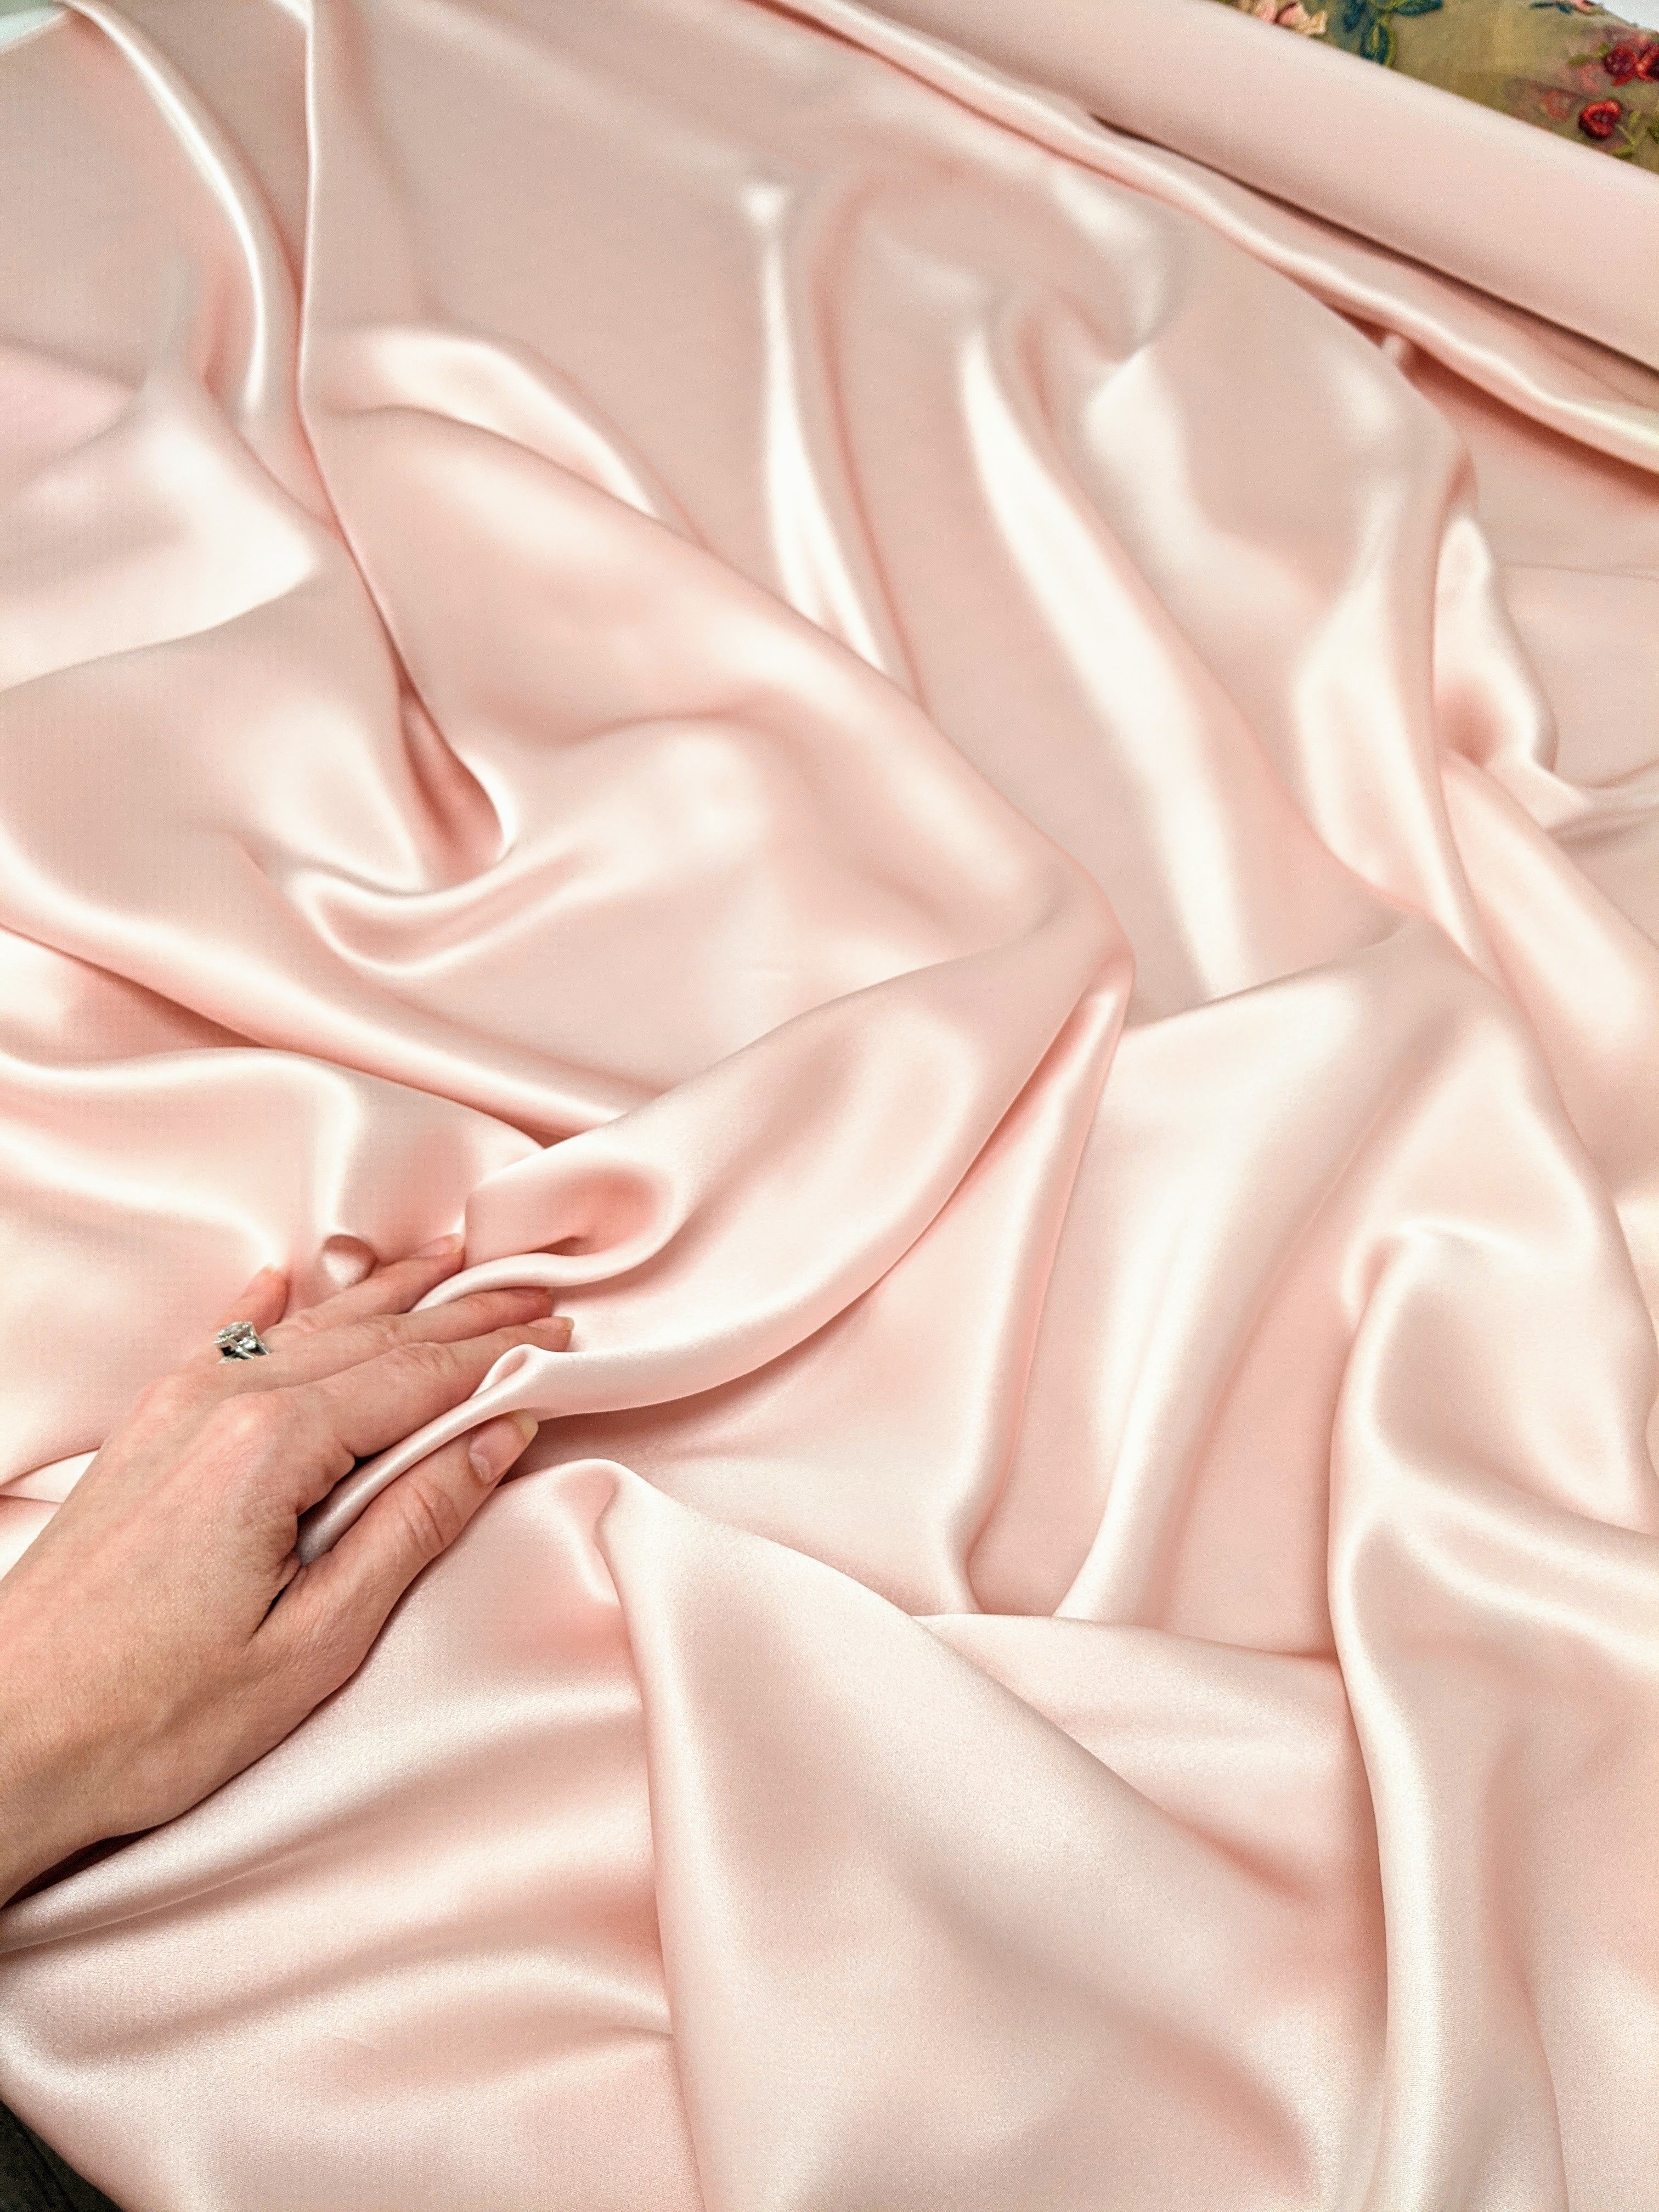 Pure silk fabric in pink silk satin for lingerie and loungewear